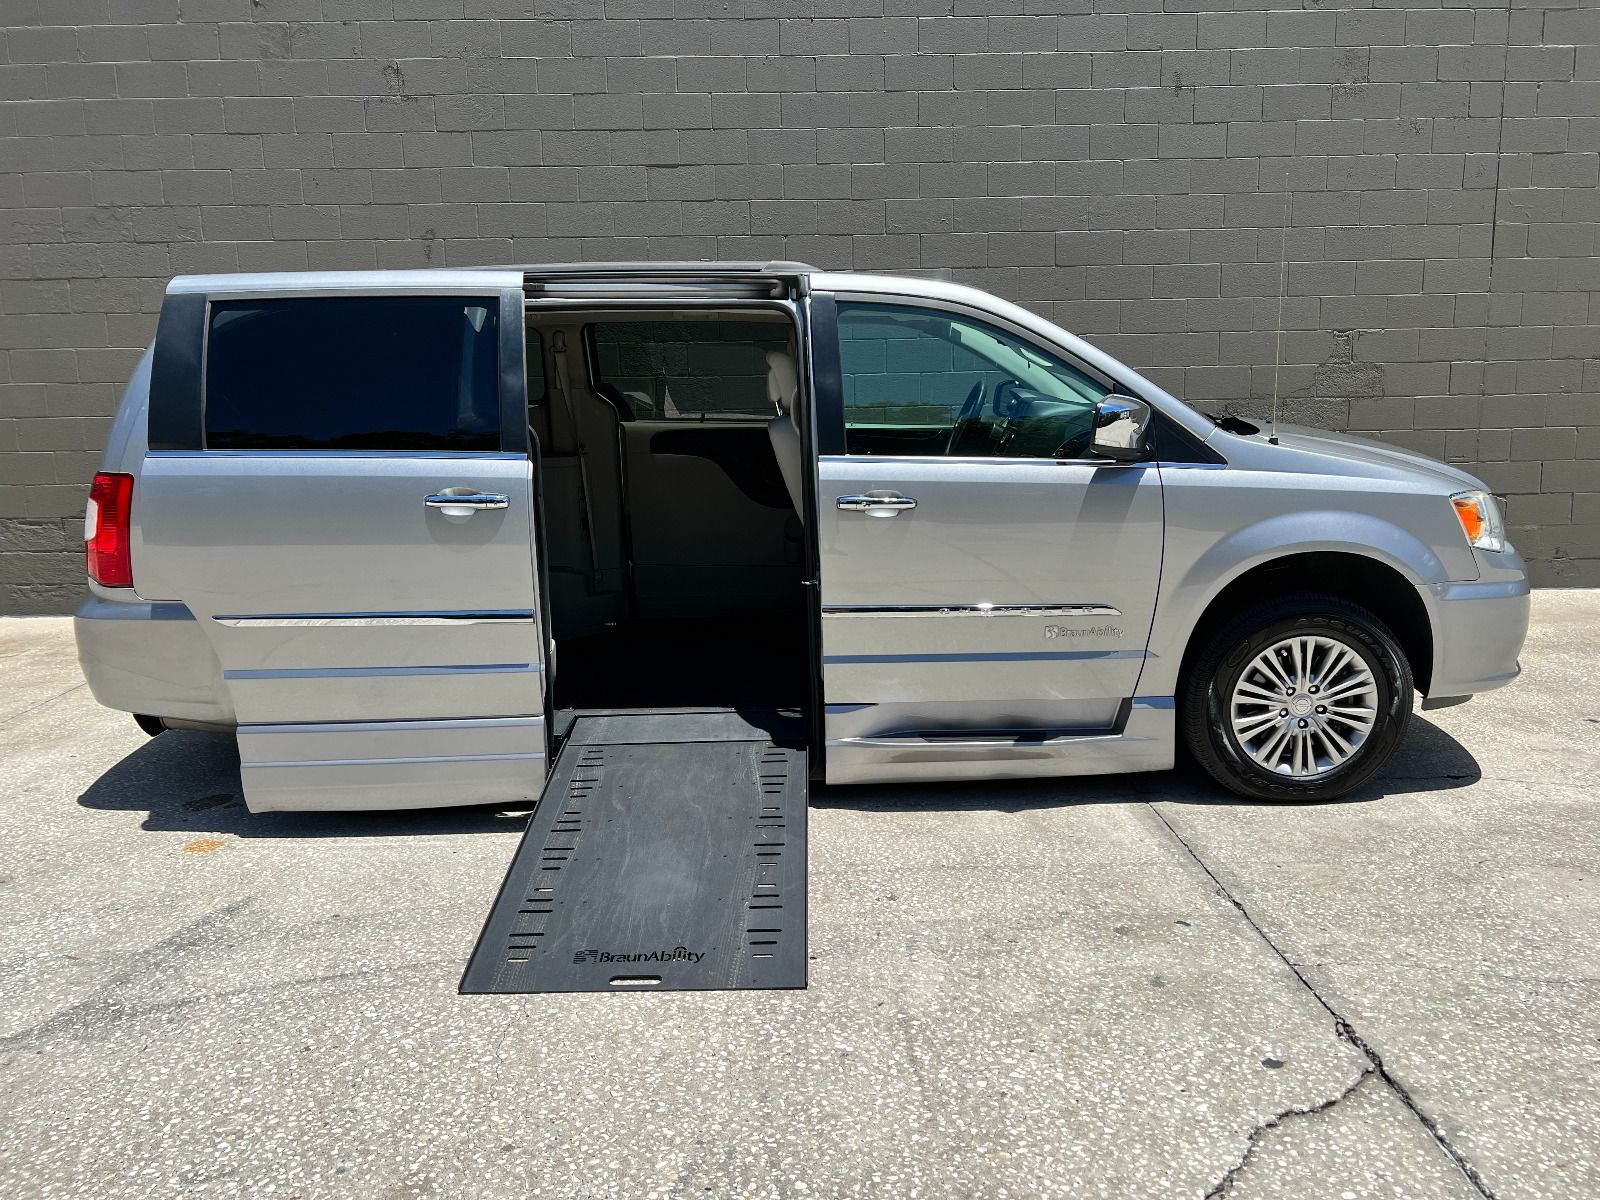 Silver 2016 Chrysler Town & Country wheelchair van with ramp deployed from passenger sliding door.